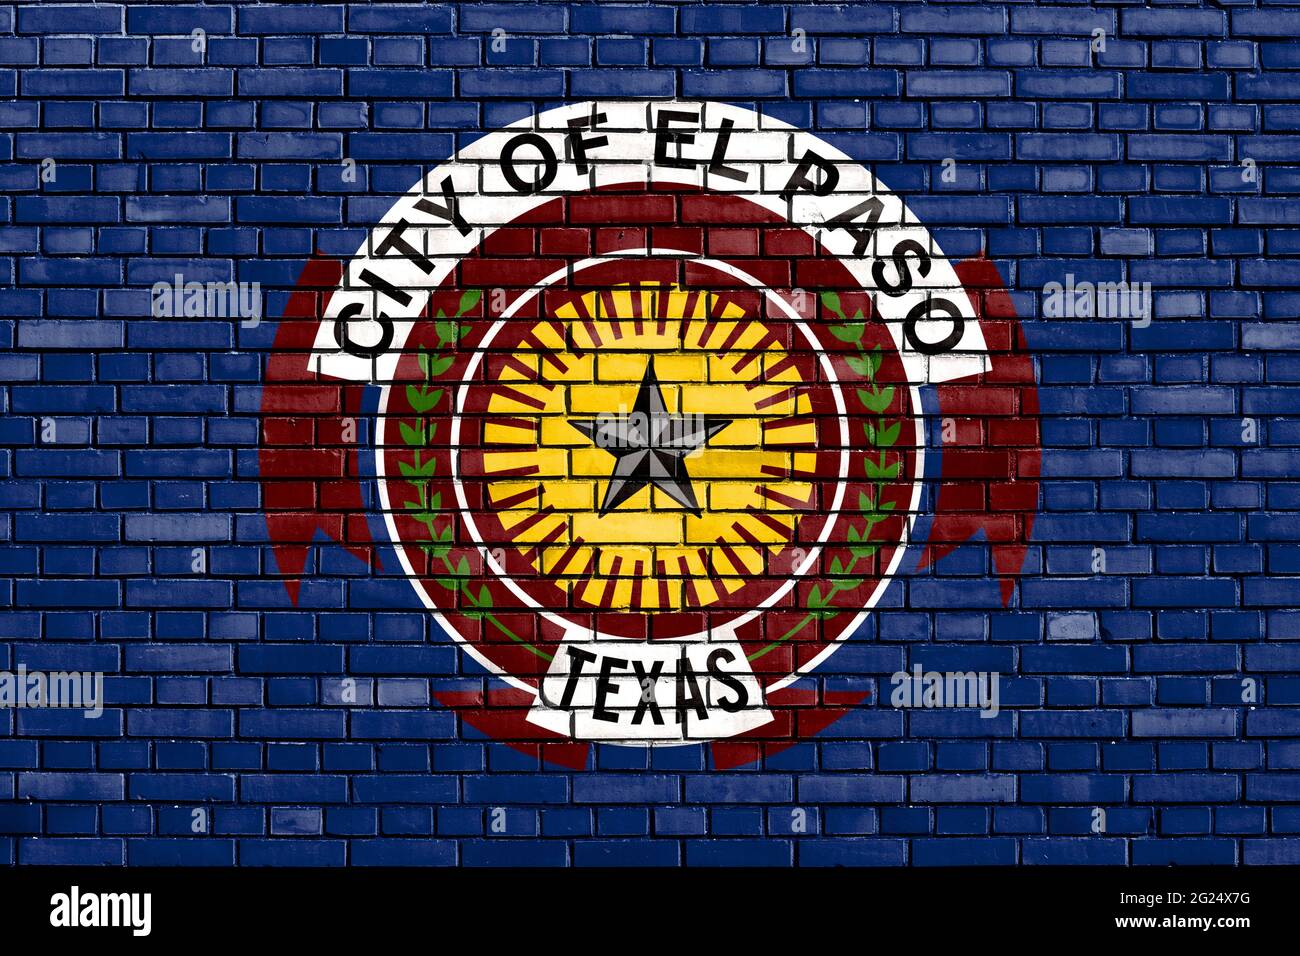 flag of El Paso, Texas painted on brick wall Stock Photo